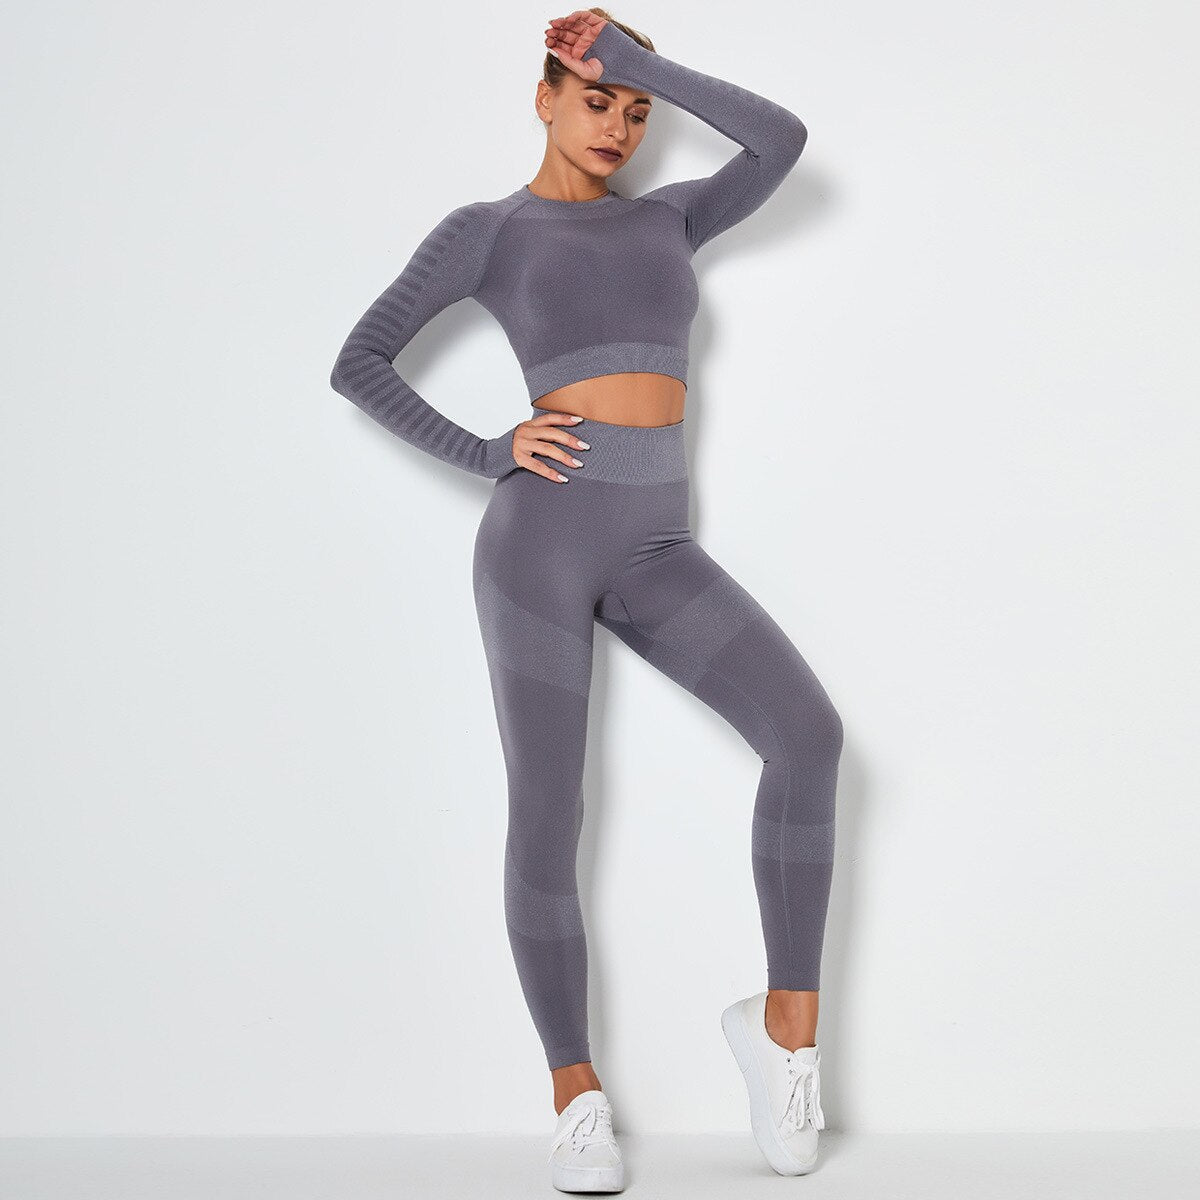 Workout Sportswear Clothing Fitness Sports Suits